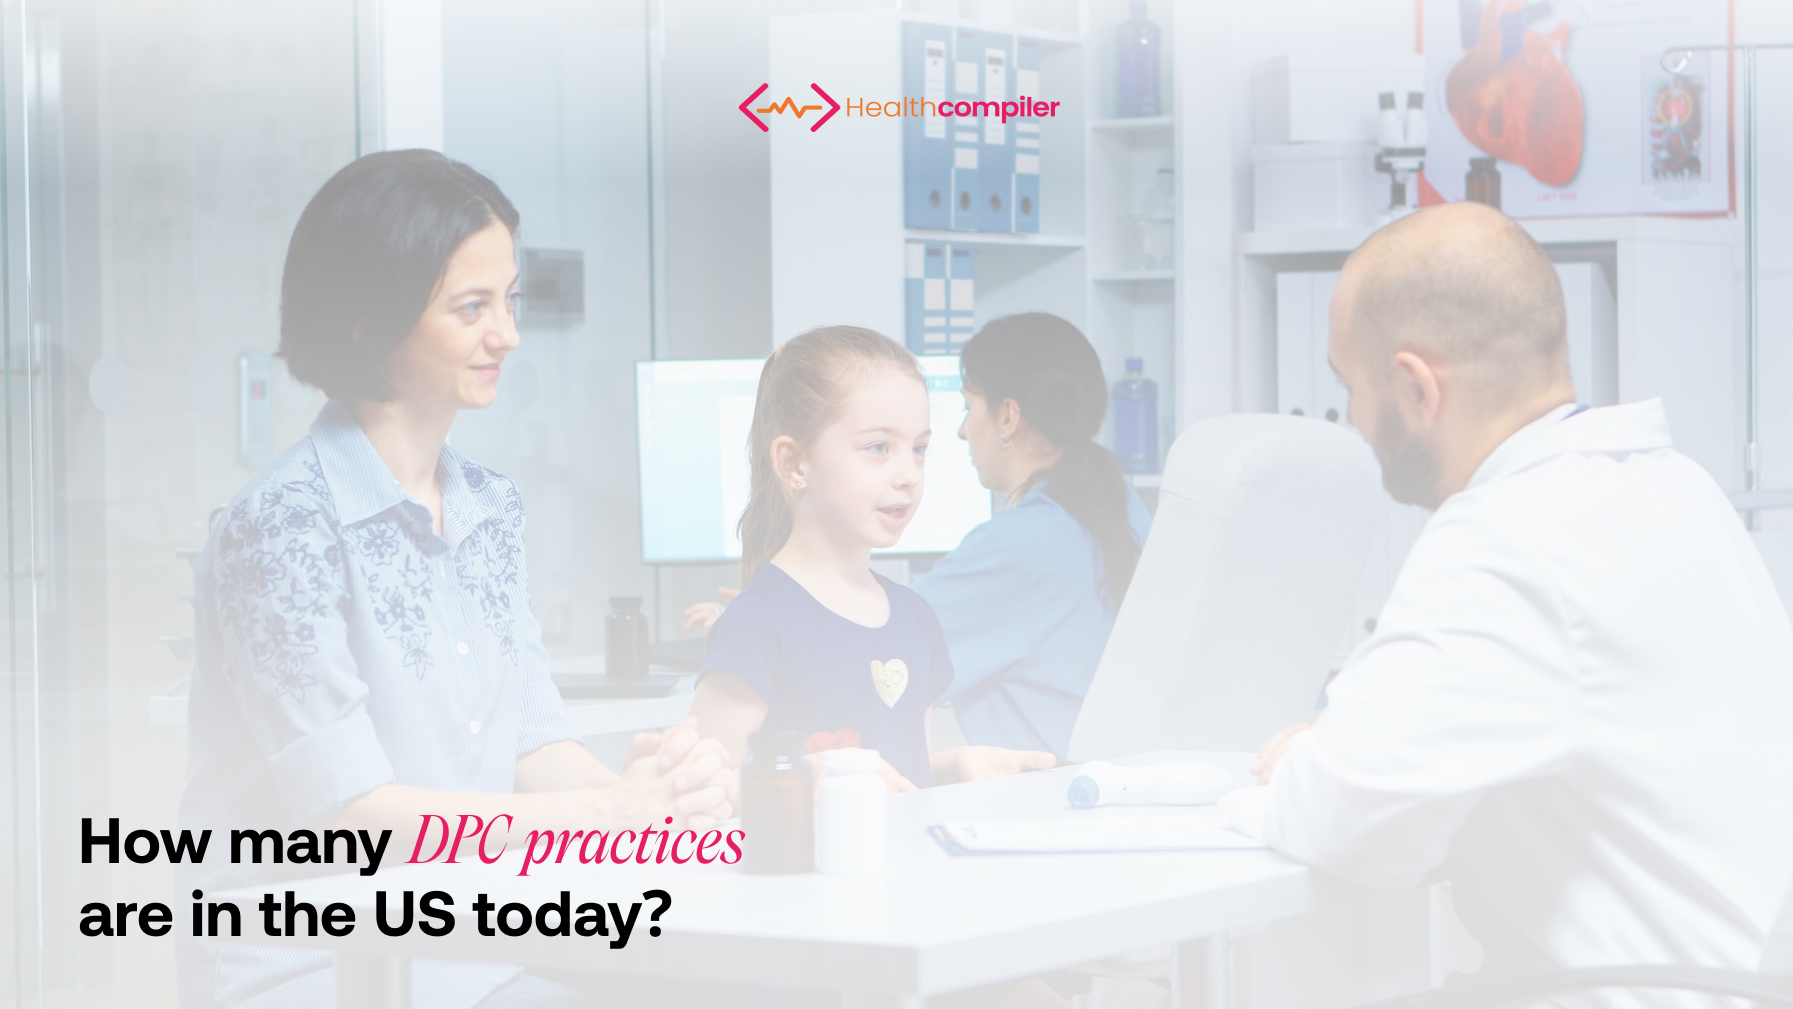 How many DPC practices are in the US today?